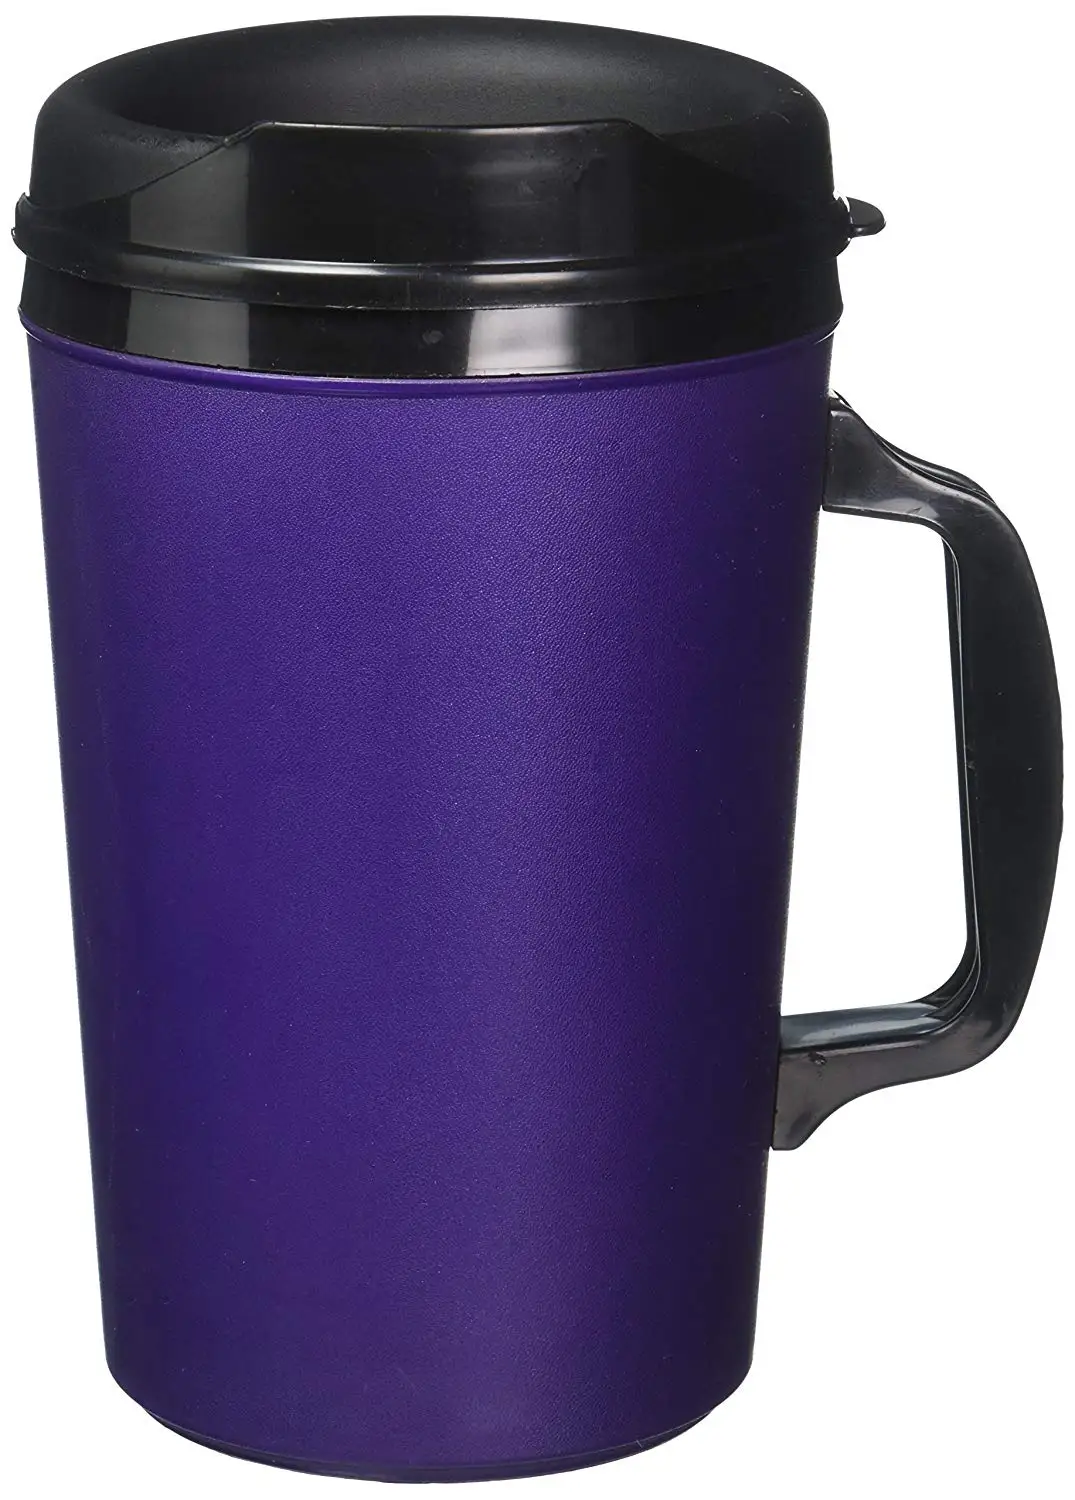 Buy 34 Oz Thermoserv Foam Insulated Coffee Mug- Red in Cheap Price on